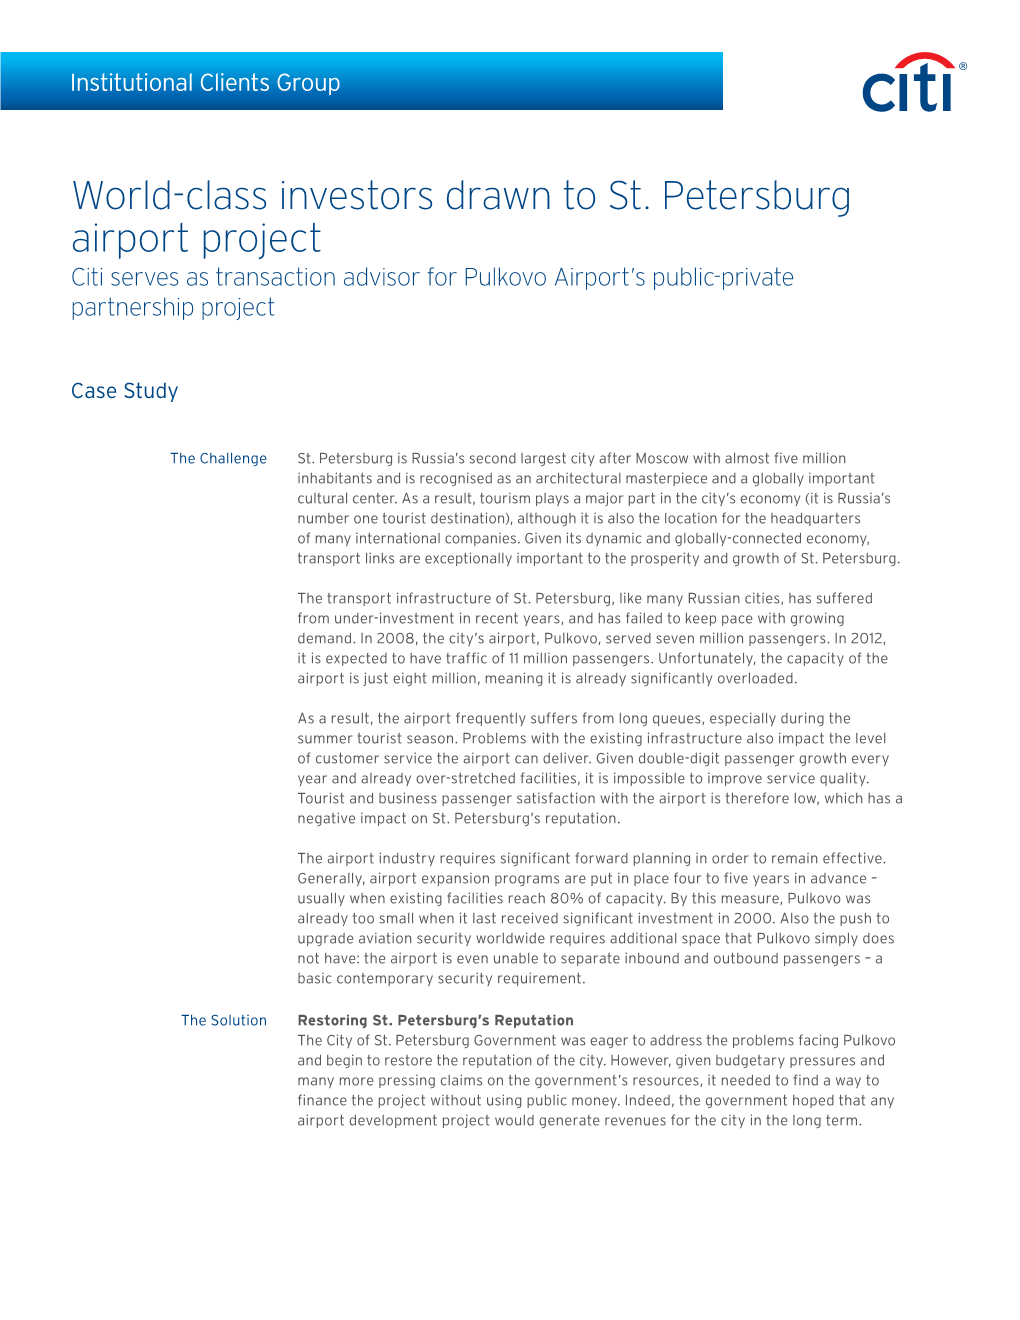 World-Class Investors Drawn to St. Petersburg Airport Project Citi Serves As Transaction Advisor for Pulkovo Airport’S Public-Private Partnership Project